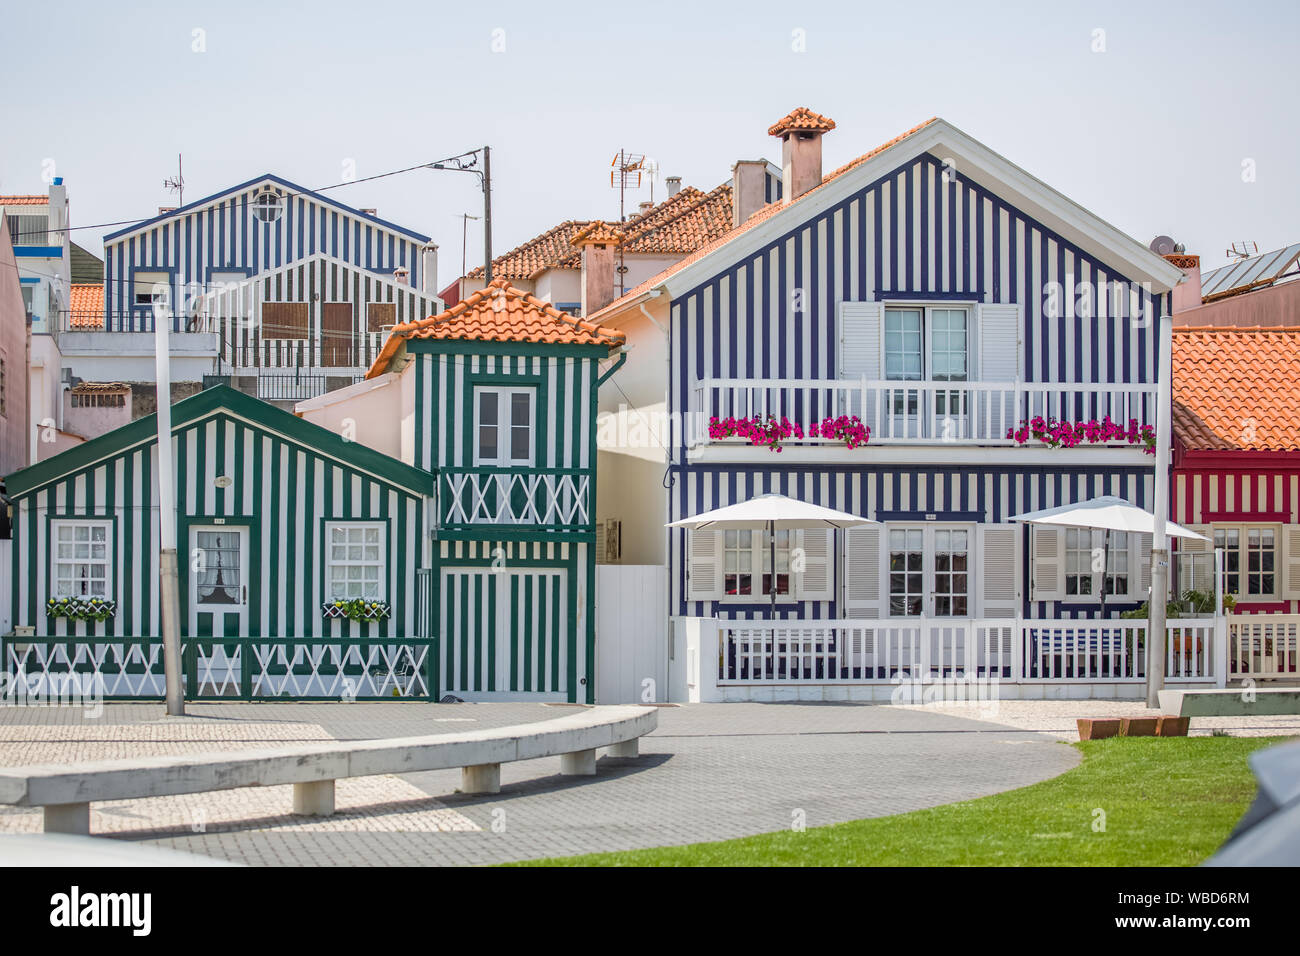 Ilhavo / Aveiro / Portugal - 07 19 2019 : View of typical Costa Nova beach house, colorful striped wooden beach houses Stock Photo